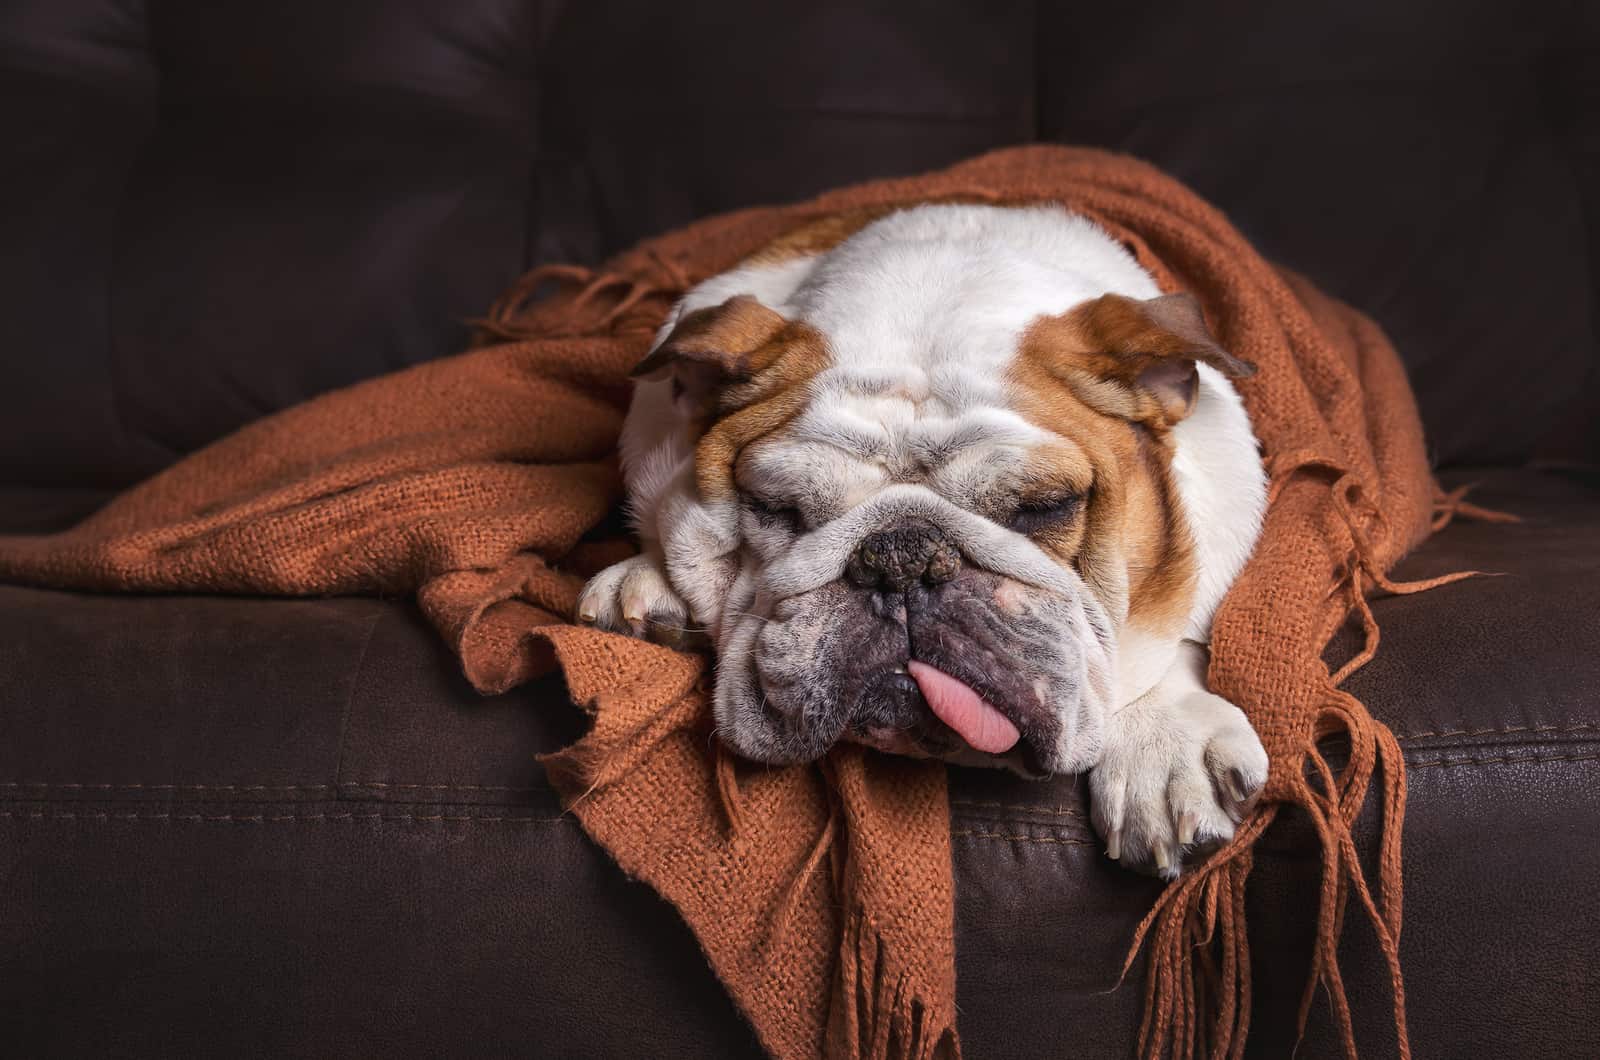 english bulldog sleeping on couch with blanket